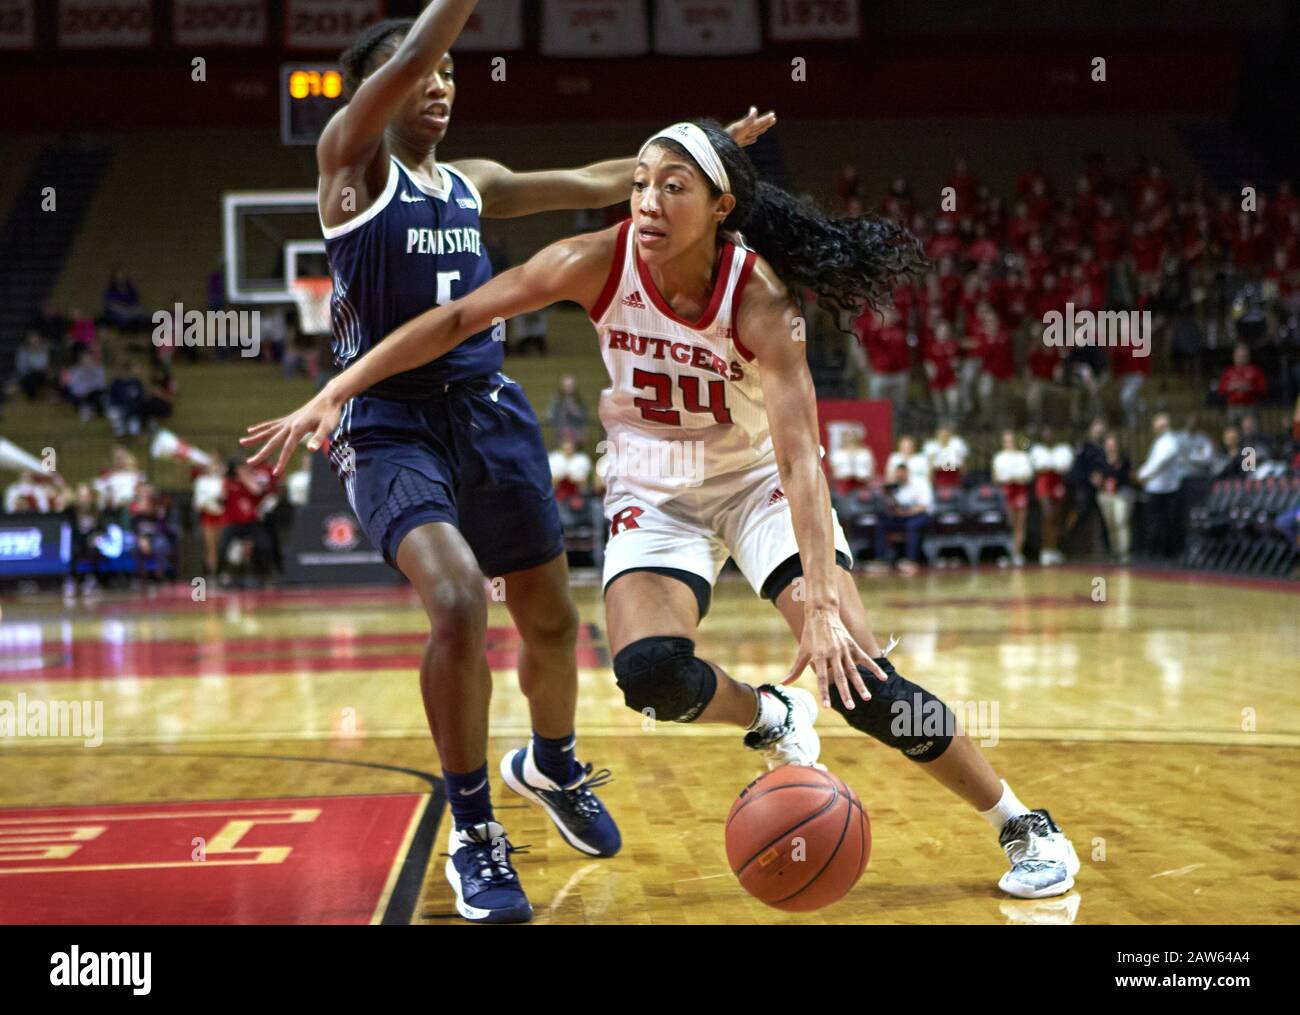 Piscataway, New Jersey, USA. 6th Feb, 2020. Rutgers Scarlet Knights guard Arella Guirantes (24) drives to the basket by Penn State Nittany Lions guard Kamaria McDaniel (5) in the second half during a game between the Penn State Nittany Lions and the Rutgers Scarlet Knights at Rutgers Athletic Center in Piscataway, New Jersey. Rutgers defeated Penn State 72-39. Duncan Williams/CSM/Alamy Live News Stock Photo